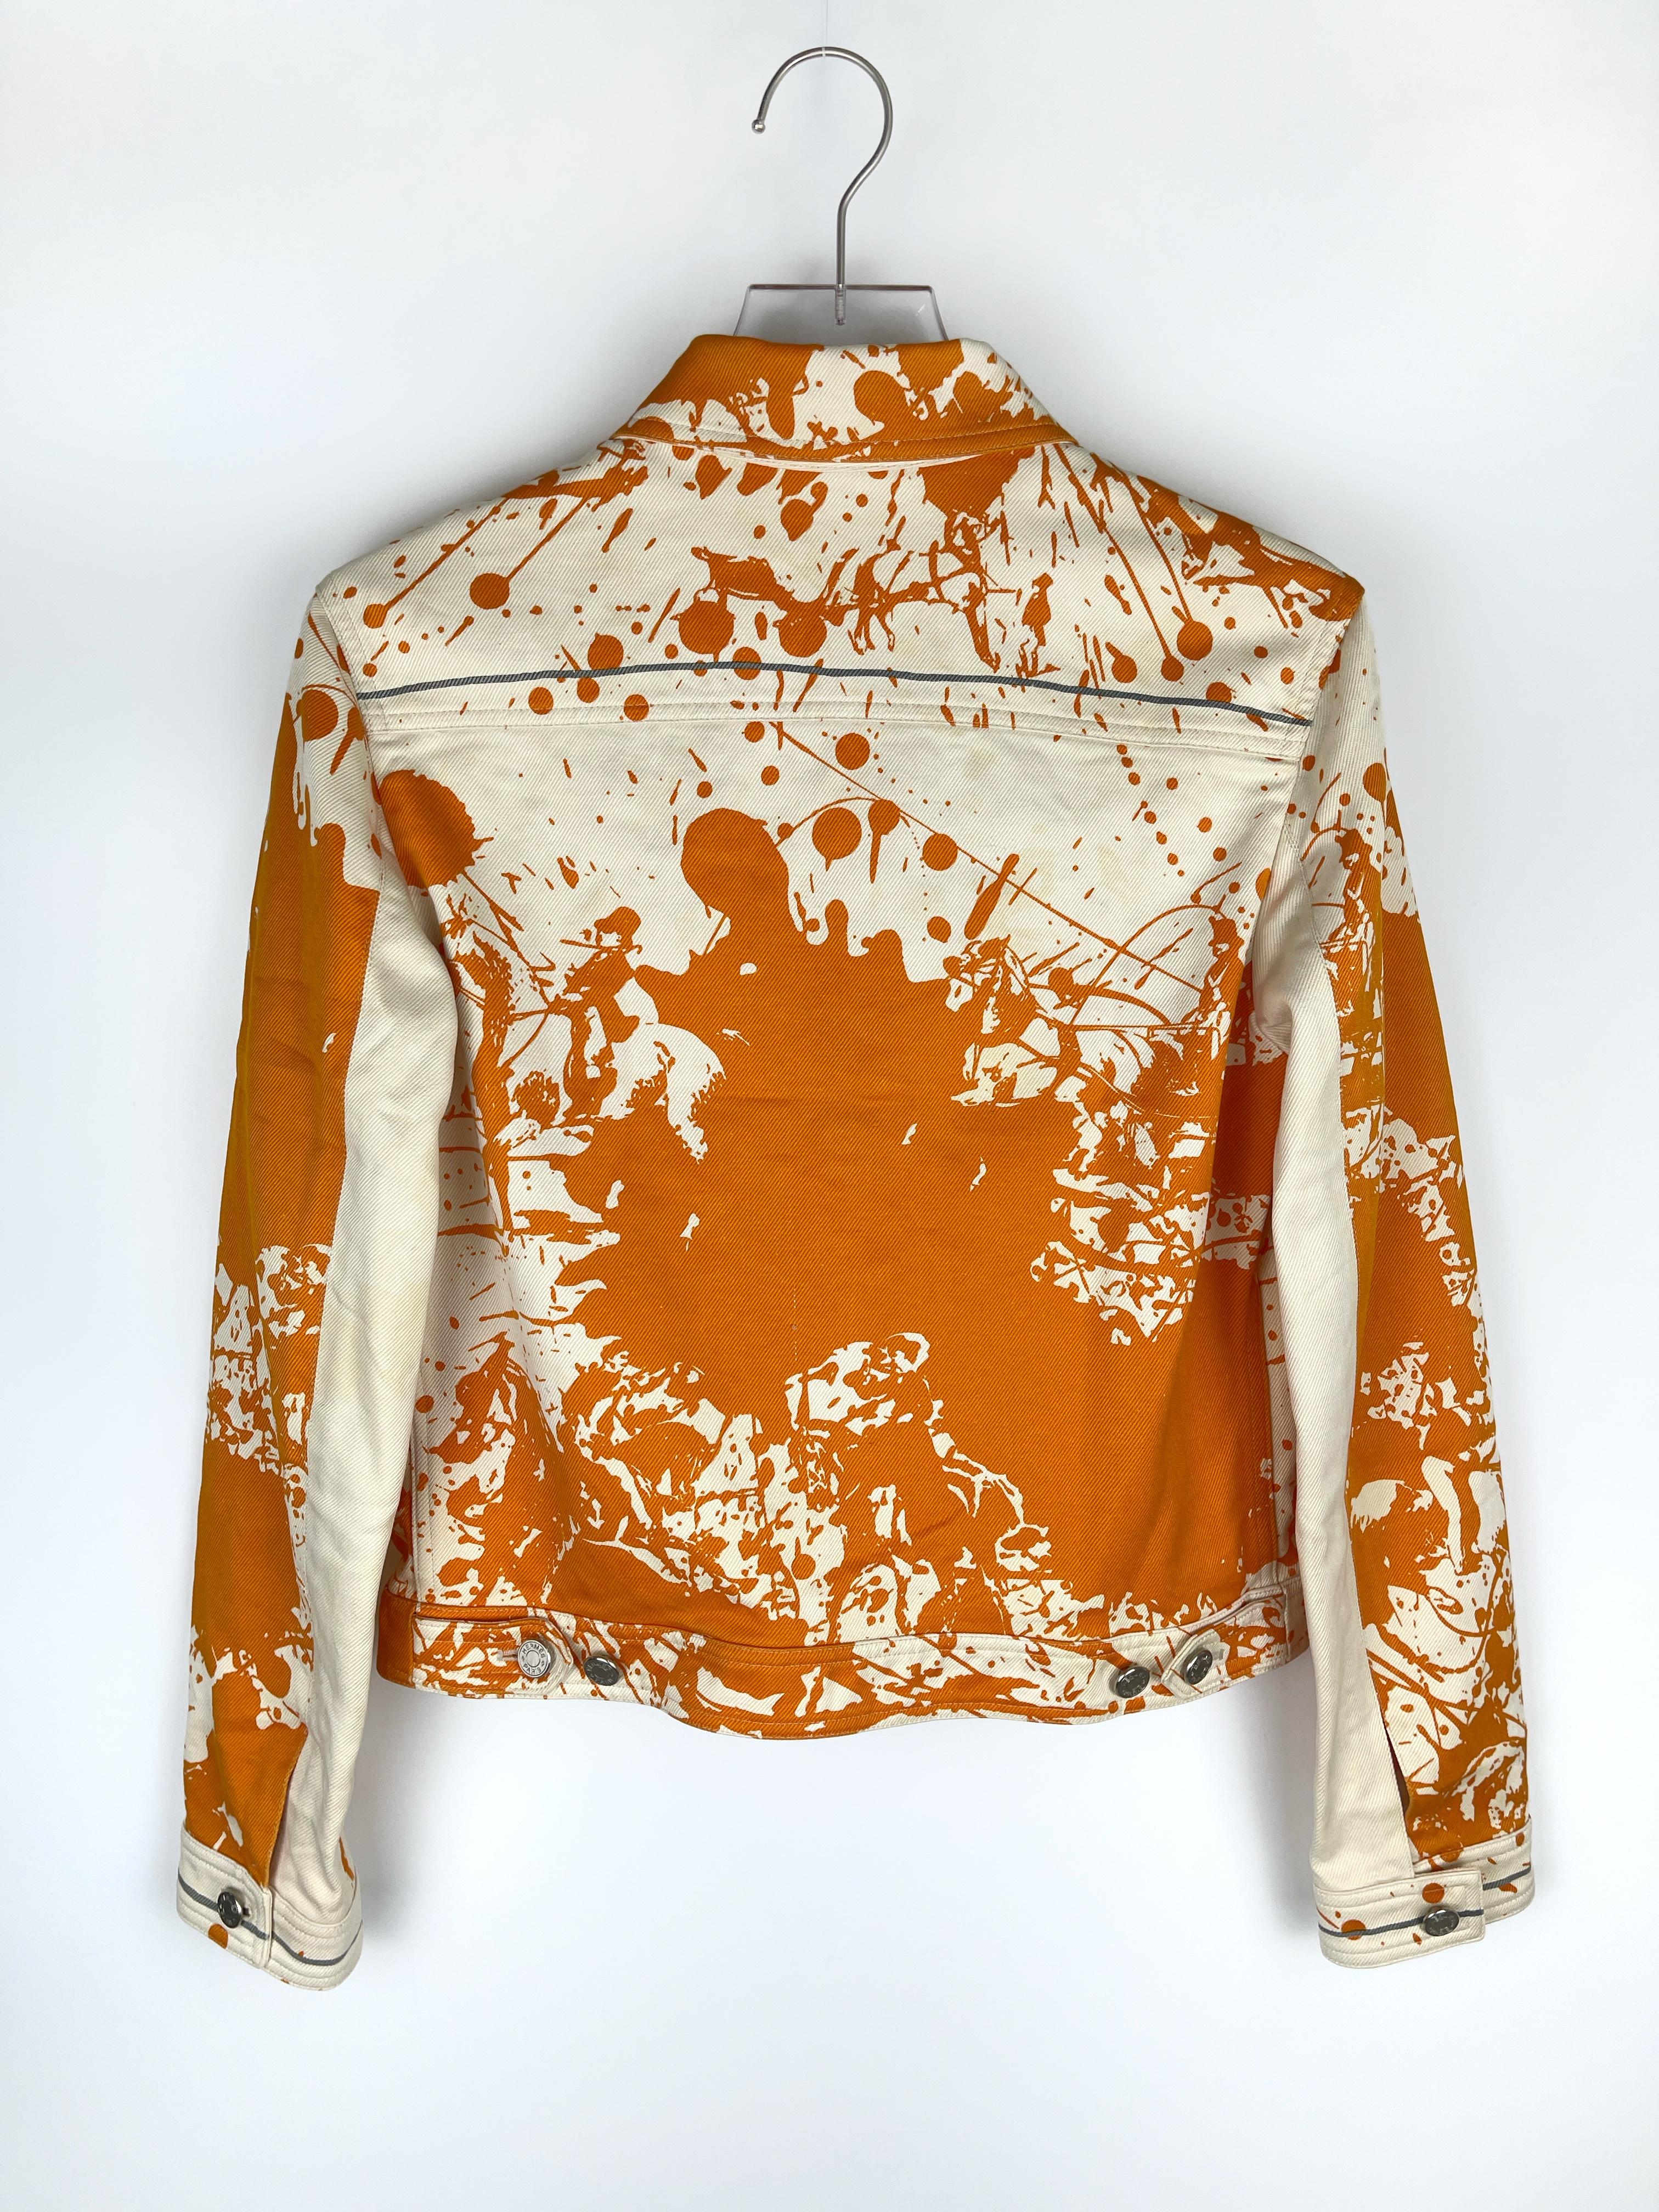 From Margiela's final collection for the Parisienne fashion house. The splatter jackets of 2003, with their print titled “Chevel Surprise,” are some of the scant immediately recognizable works from his time there, yet also some of his more